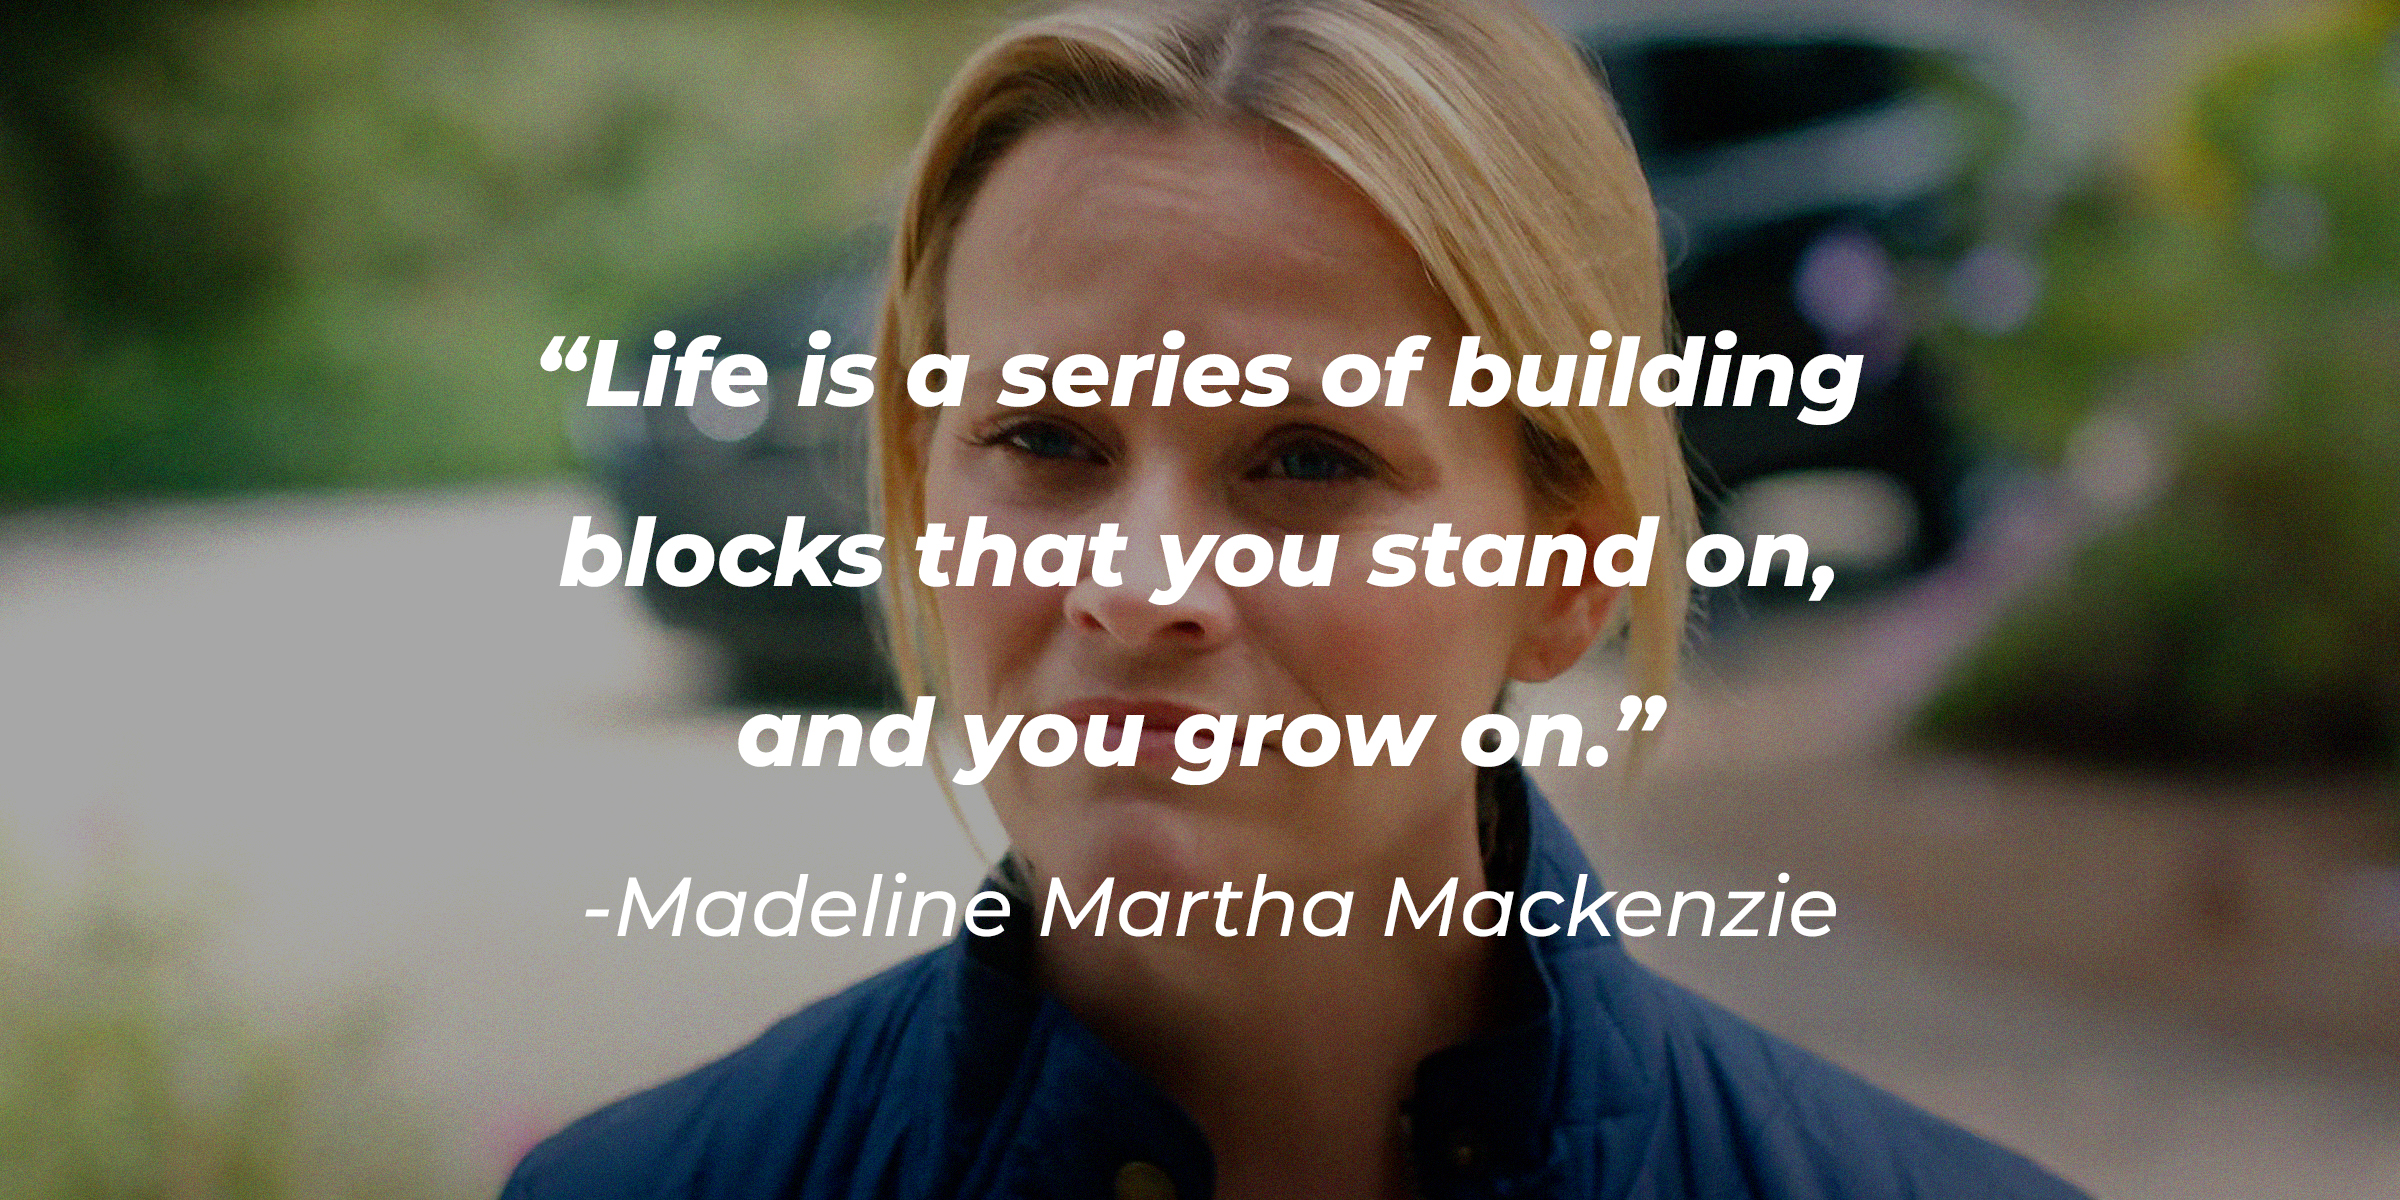 Madeline Martha Mackenzie, with her quote: “Life is a series of building blocks that you stand on, and you grow on.”│Source: youtube.com/HBO